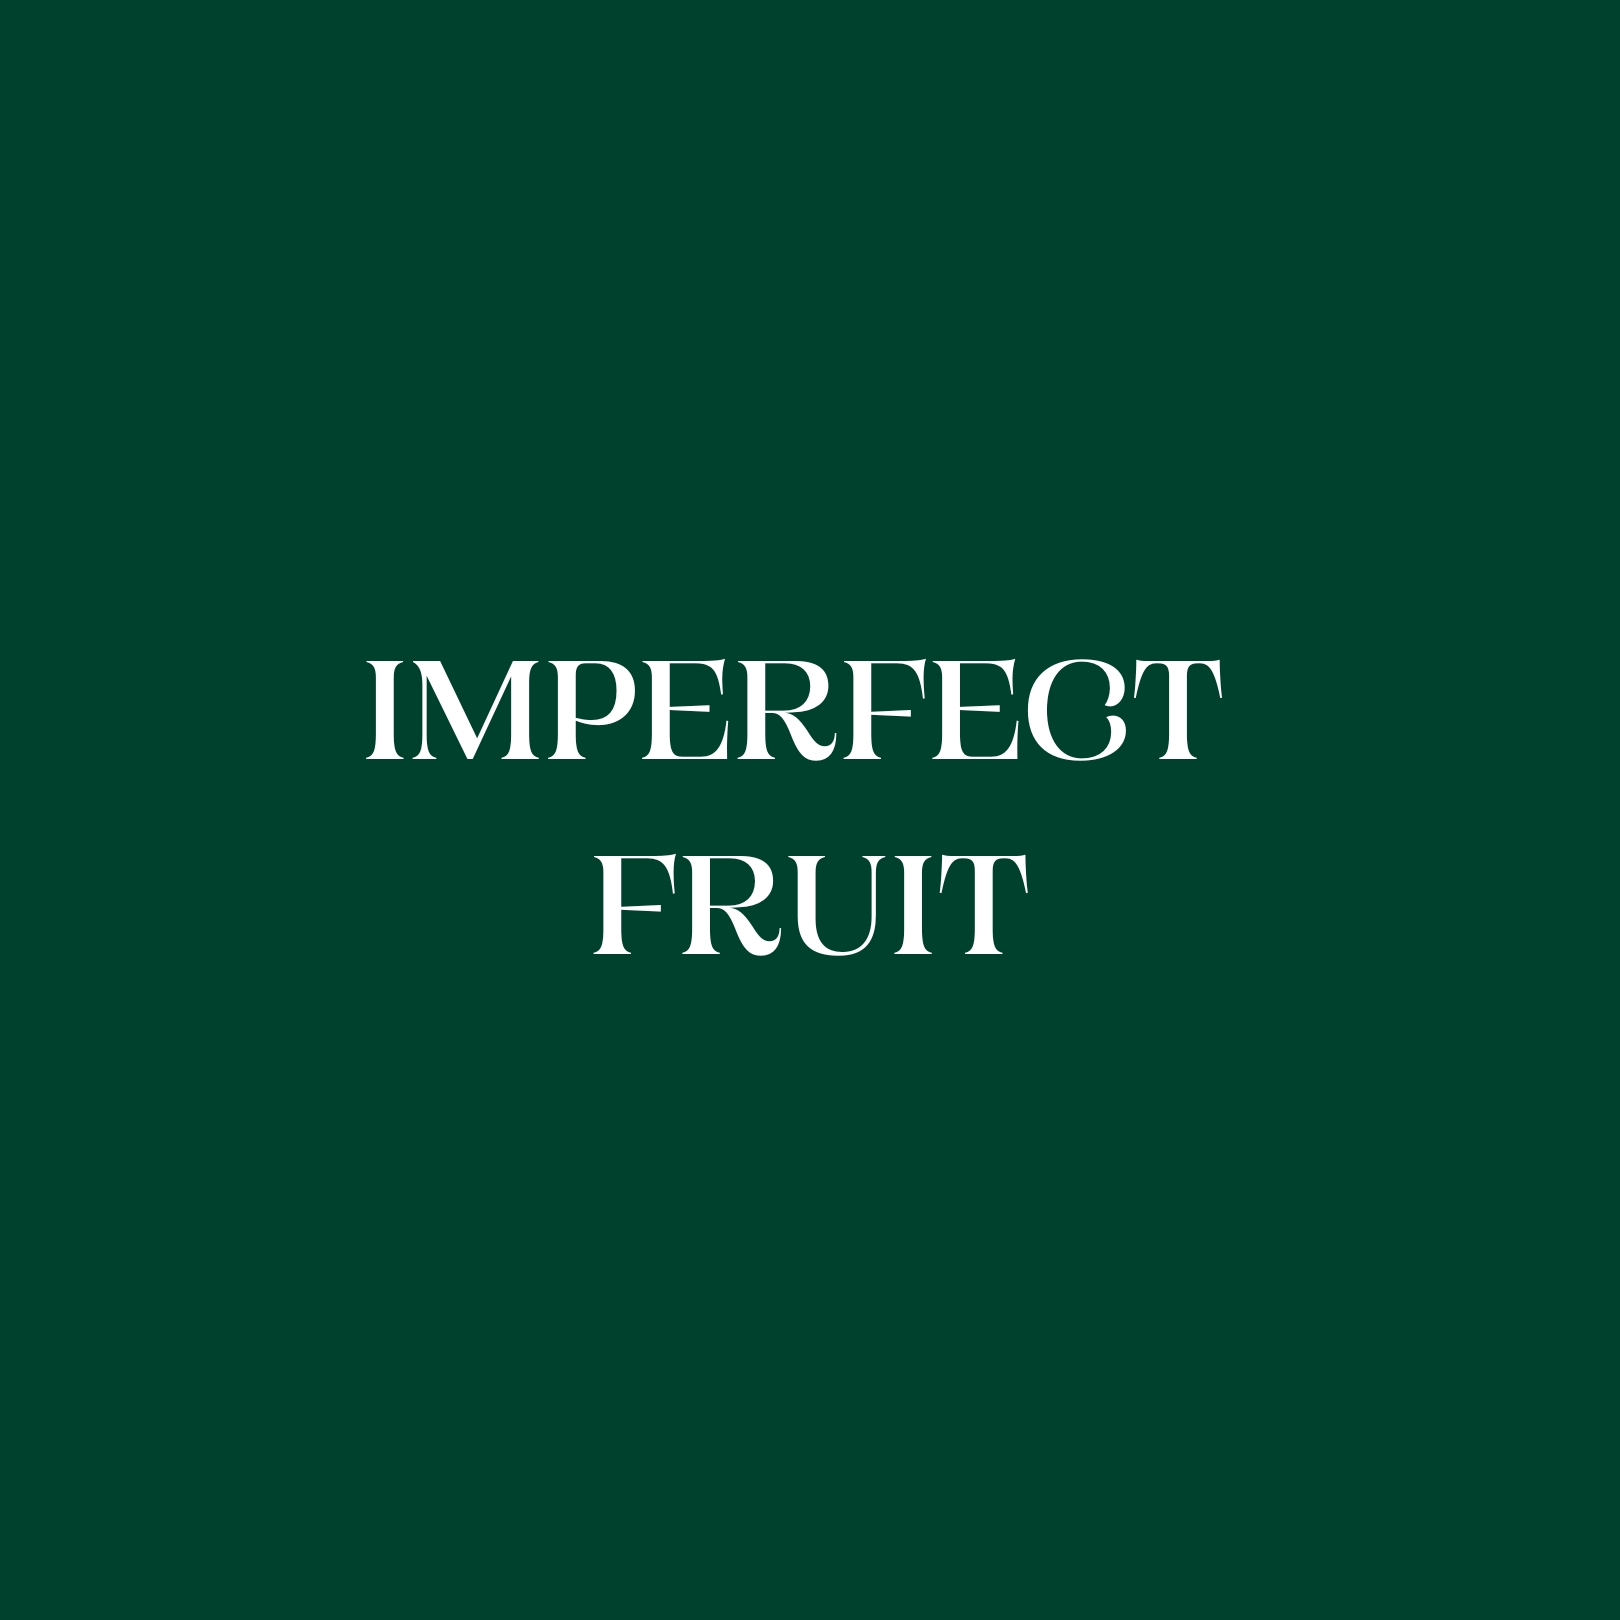 Buy Imperfect Finger Limes Online NZ - Twisted Citrus